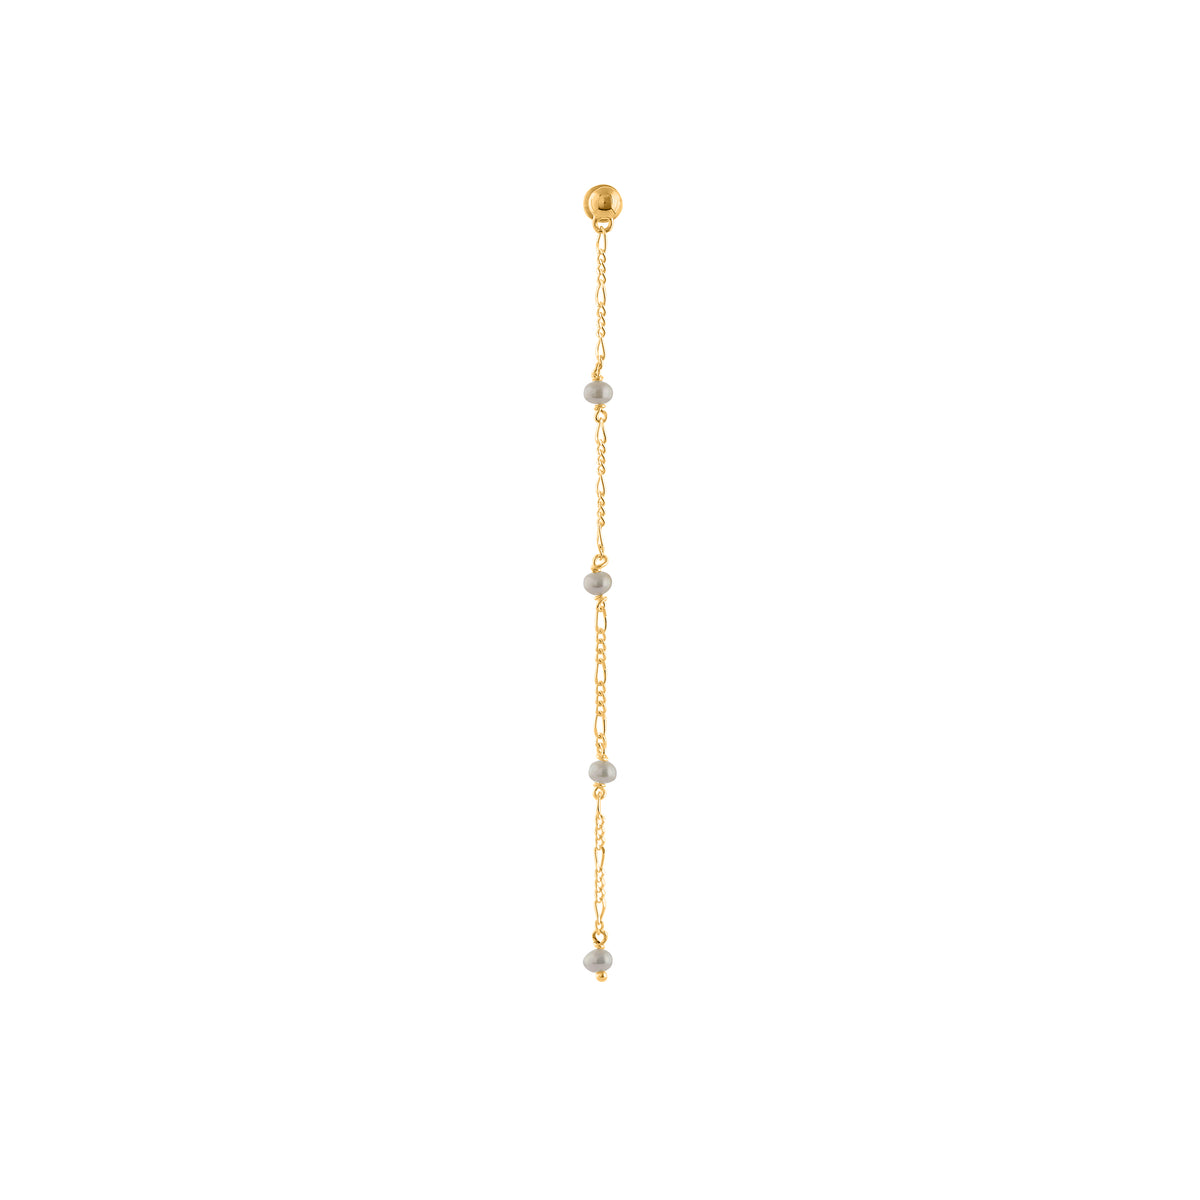 PEARLS CHAIN EARRINGS gold plated